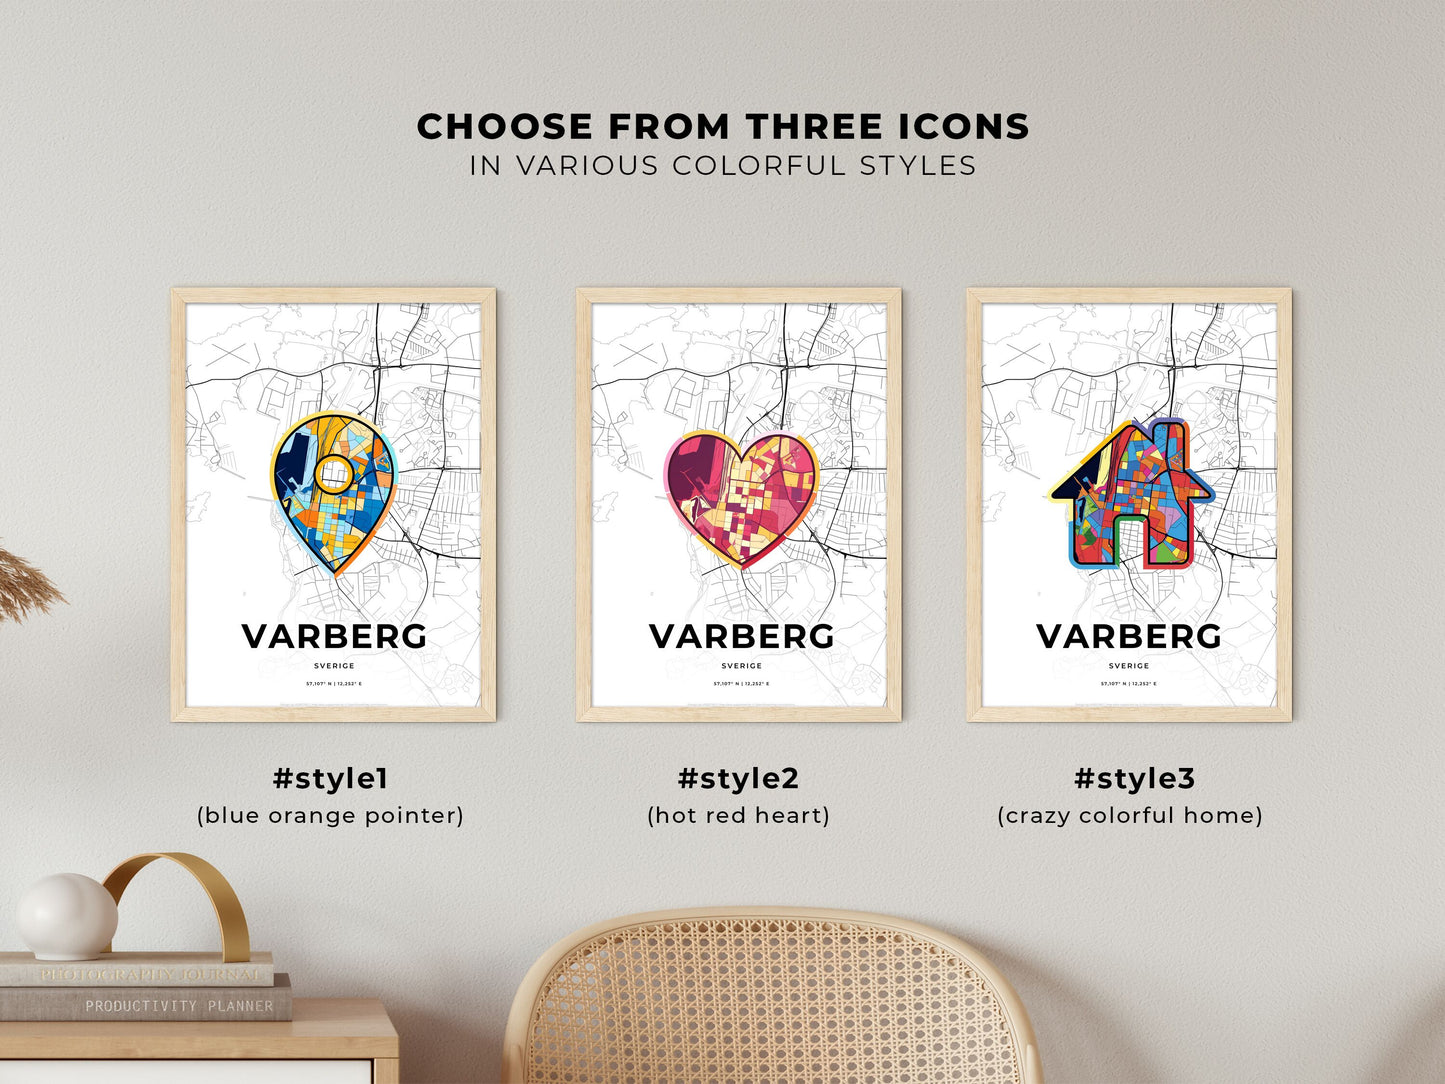 VARBERG SWEDEN minimal art map with a colorful icon. Where it all began, Couple map gift.